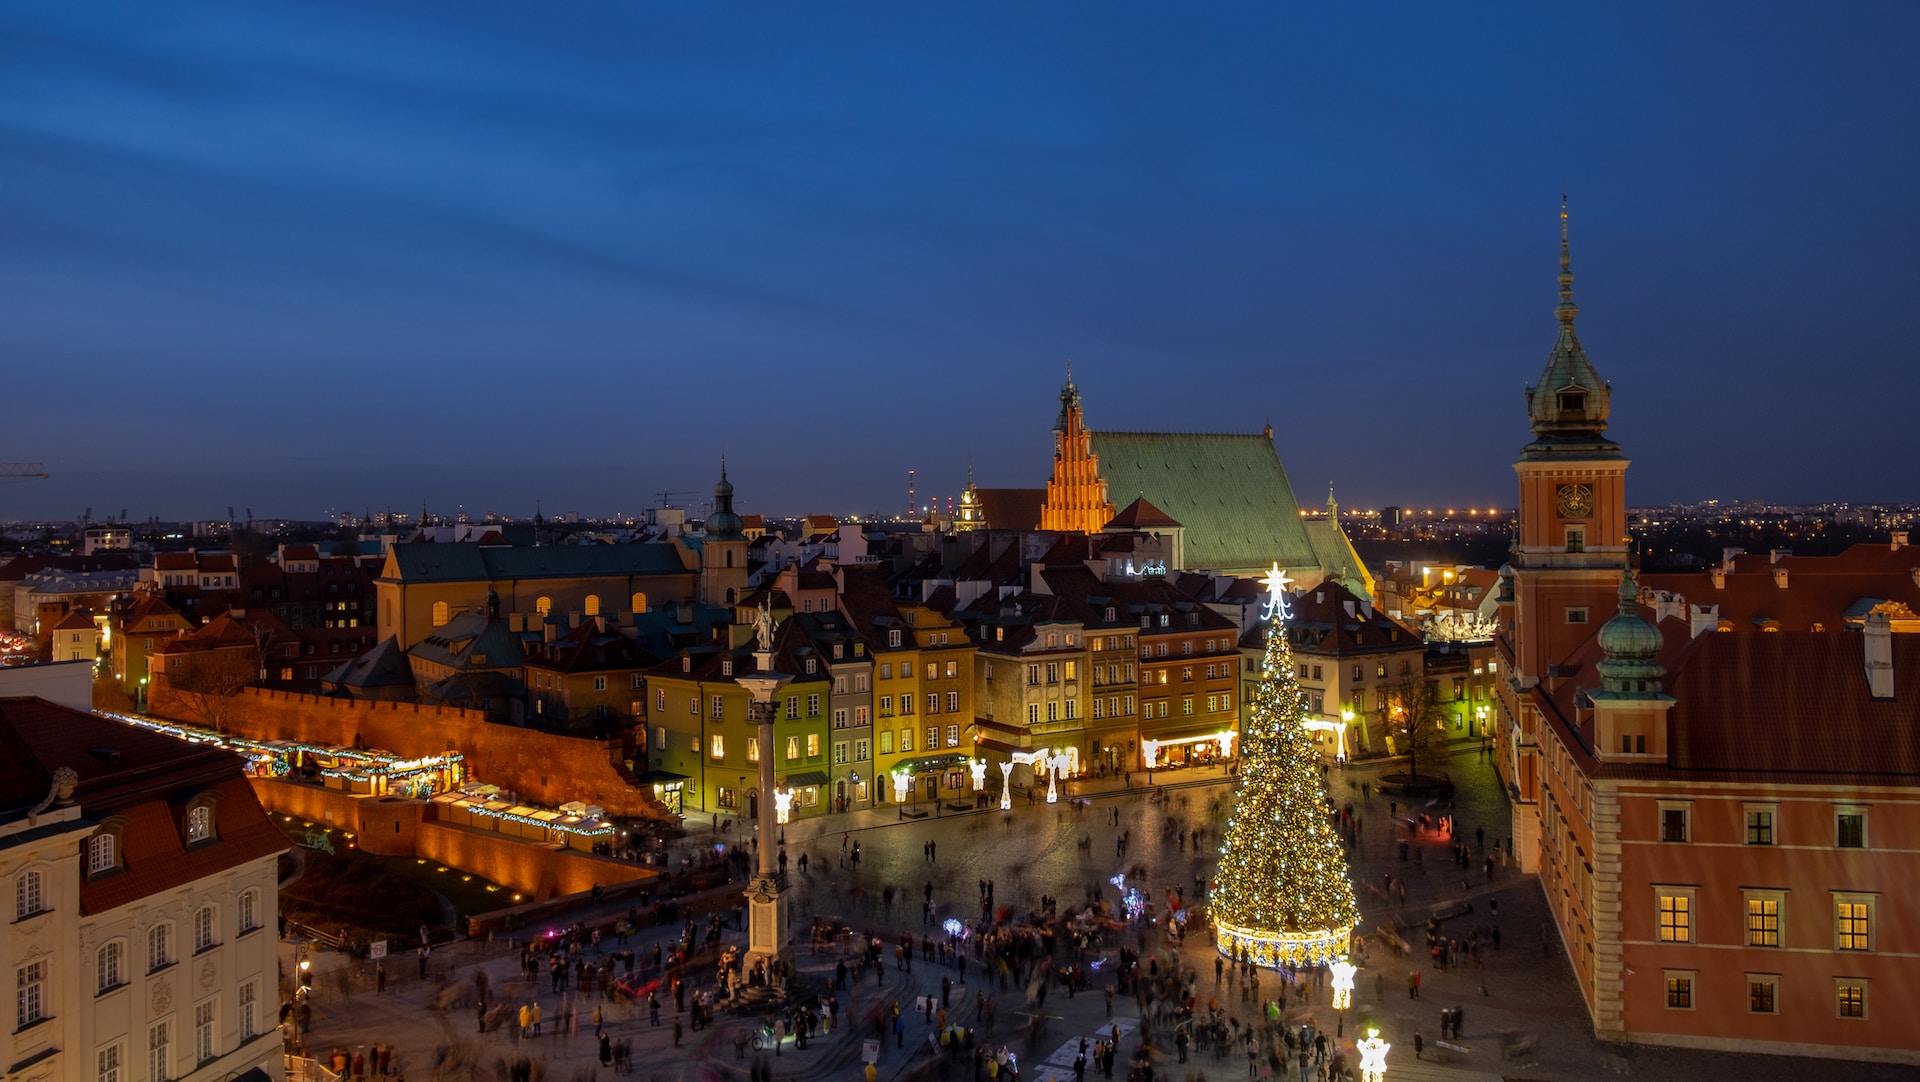 Warsaw during the Christmas.